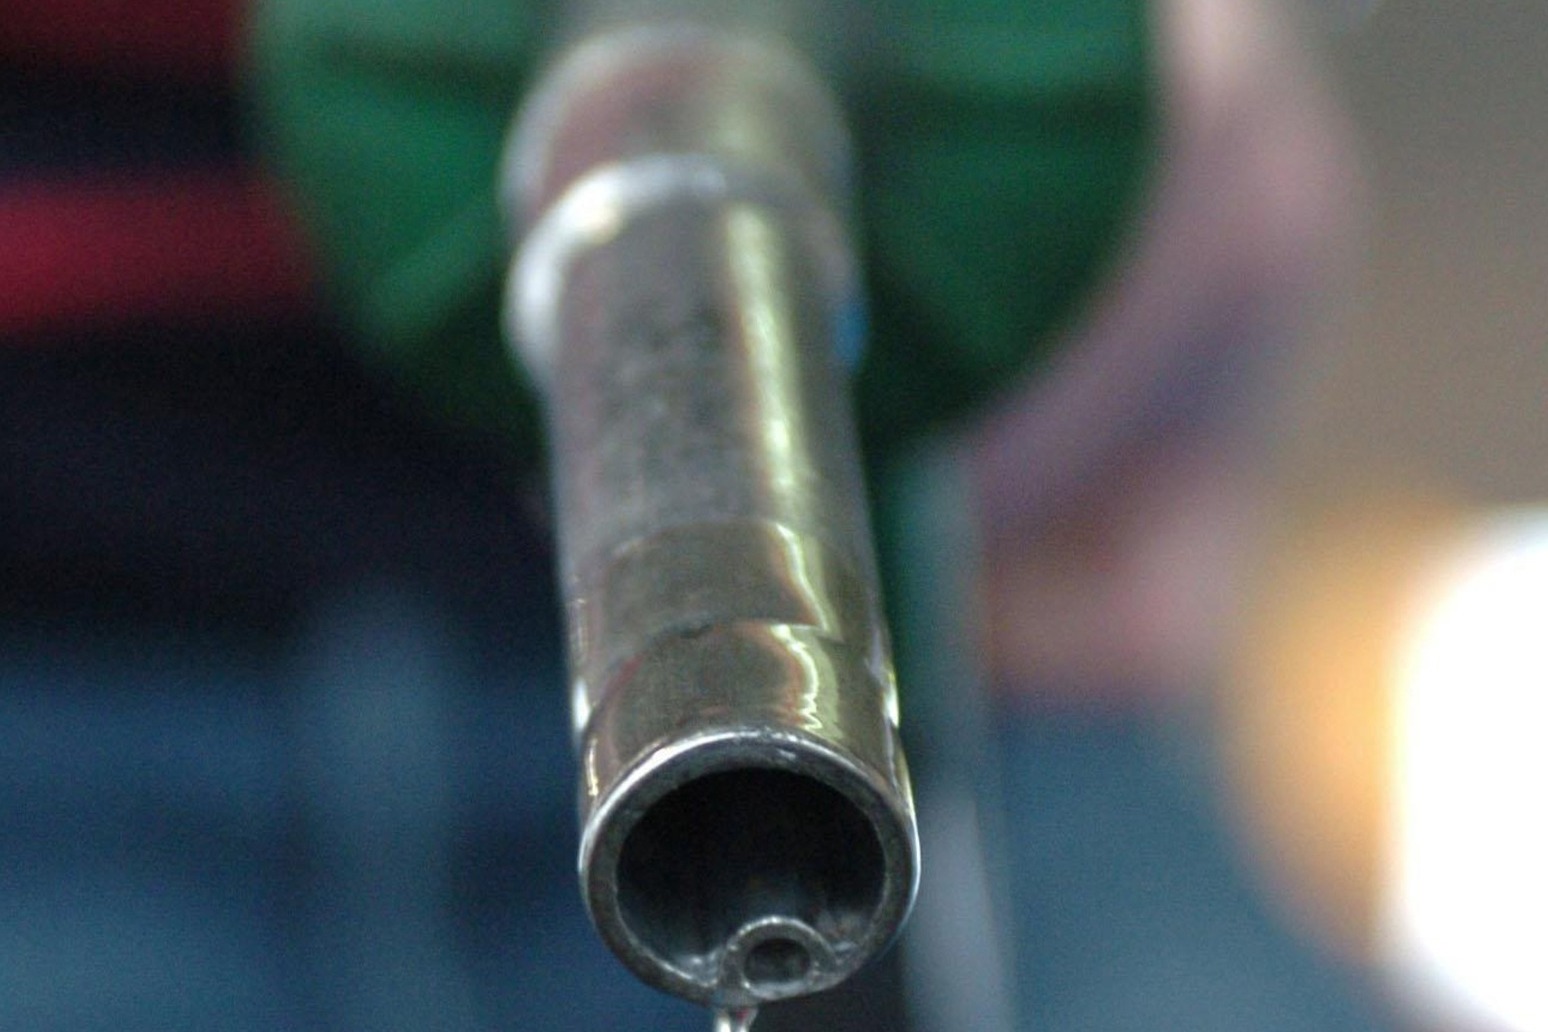 Drivers warned to expect rise in fuel prices soon as Russia invades Ukraine